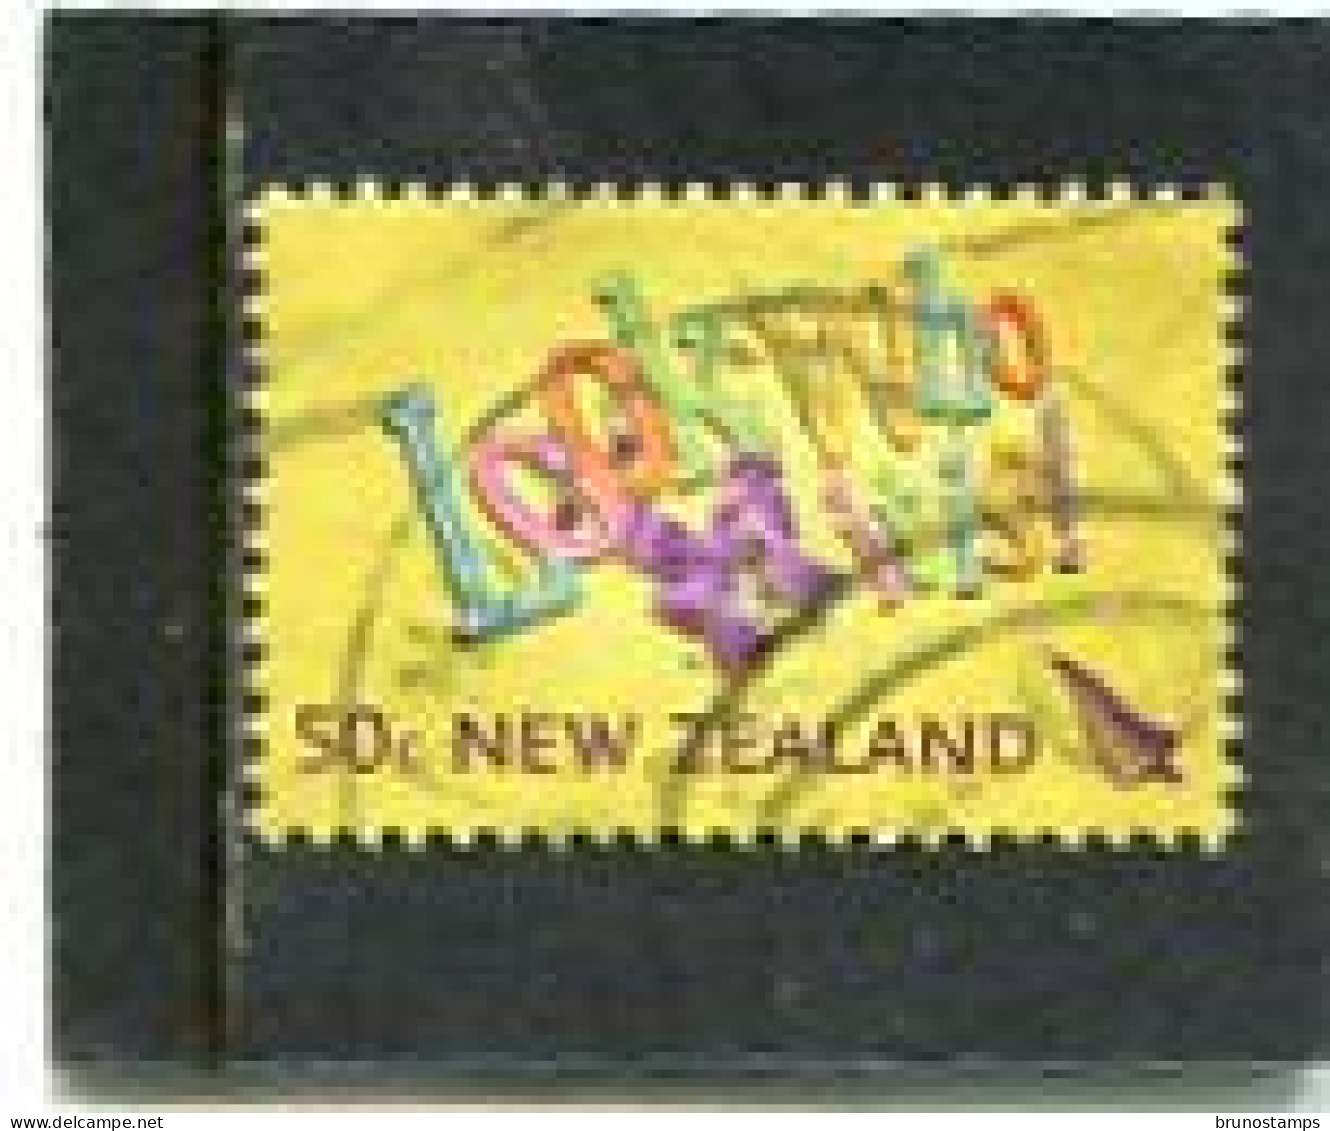 NEW ZEALAND - 2007  50c  GREETINGS  FINE  USED - Used Stamps